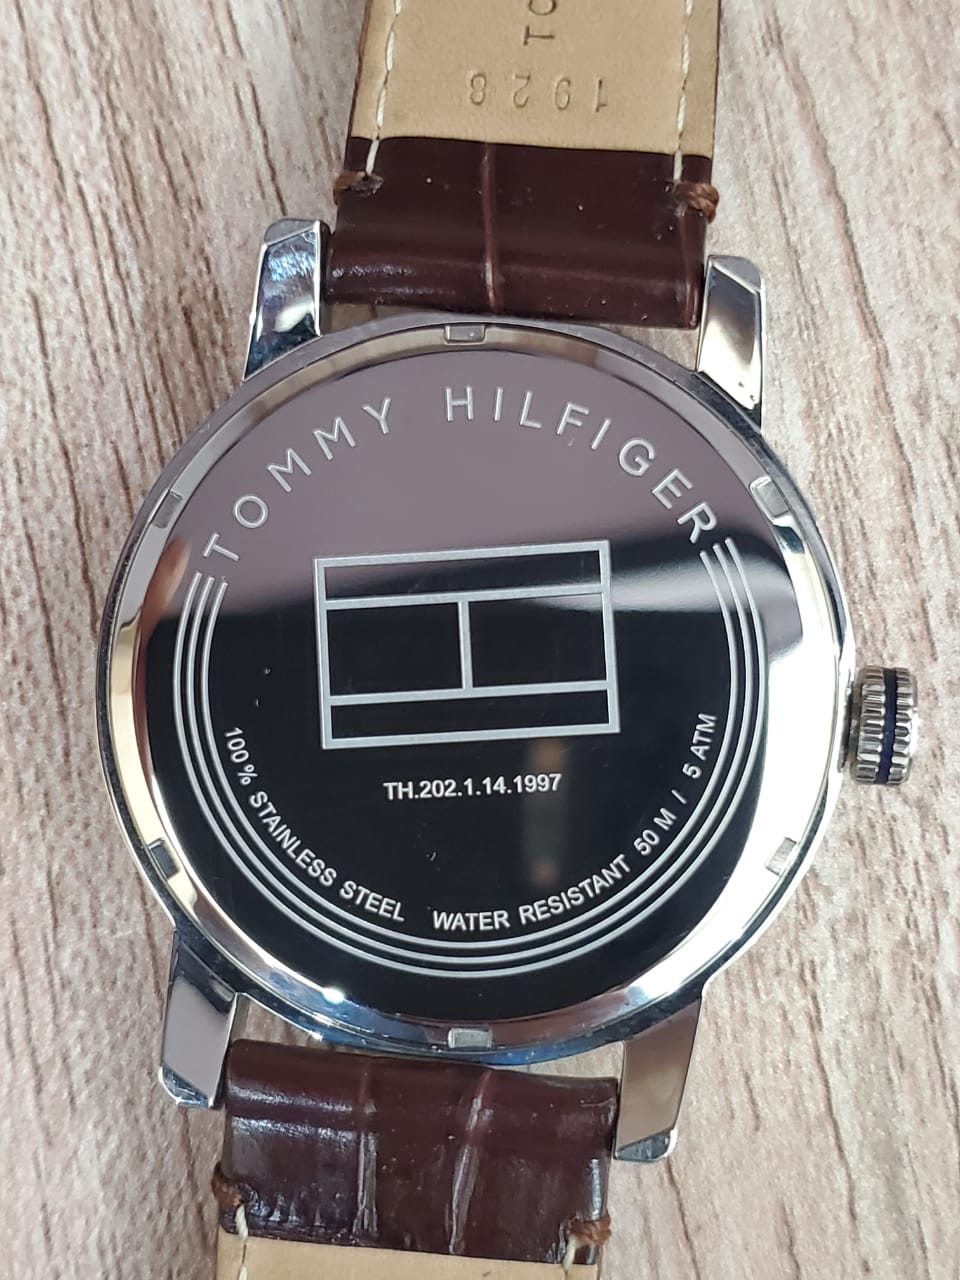 Which movement is used in Tommy Hilfiger watches? Is it a Japanese  movement? - Quora